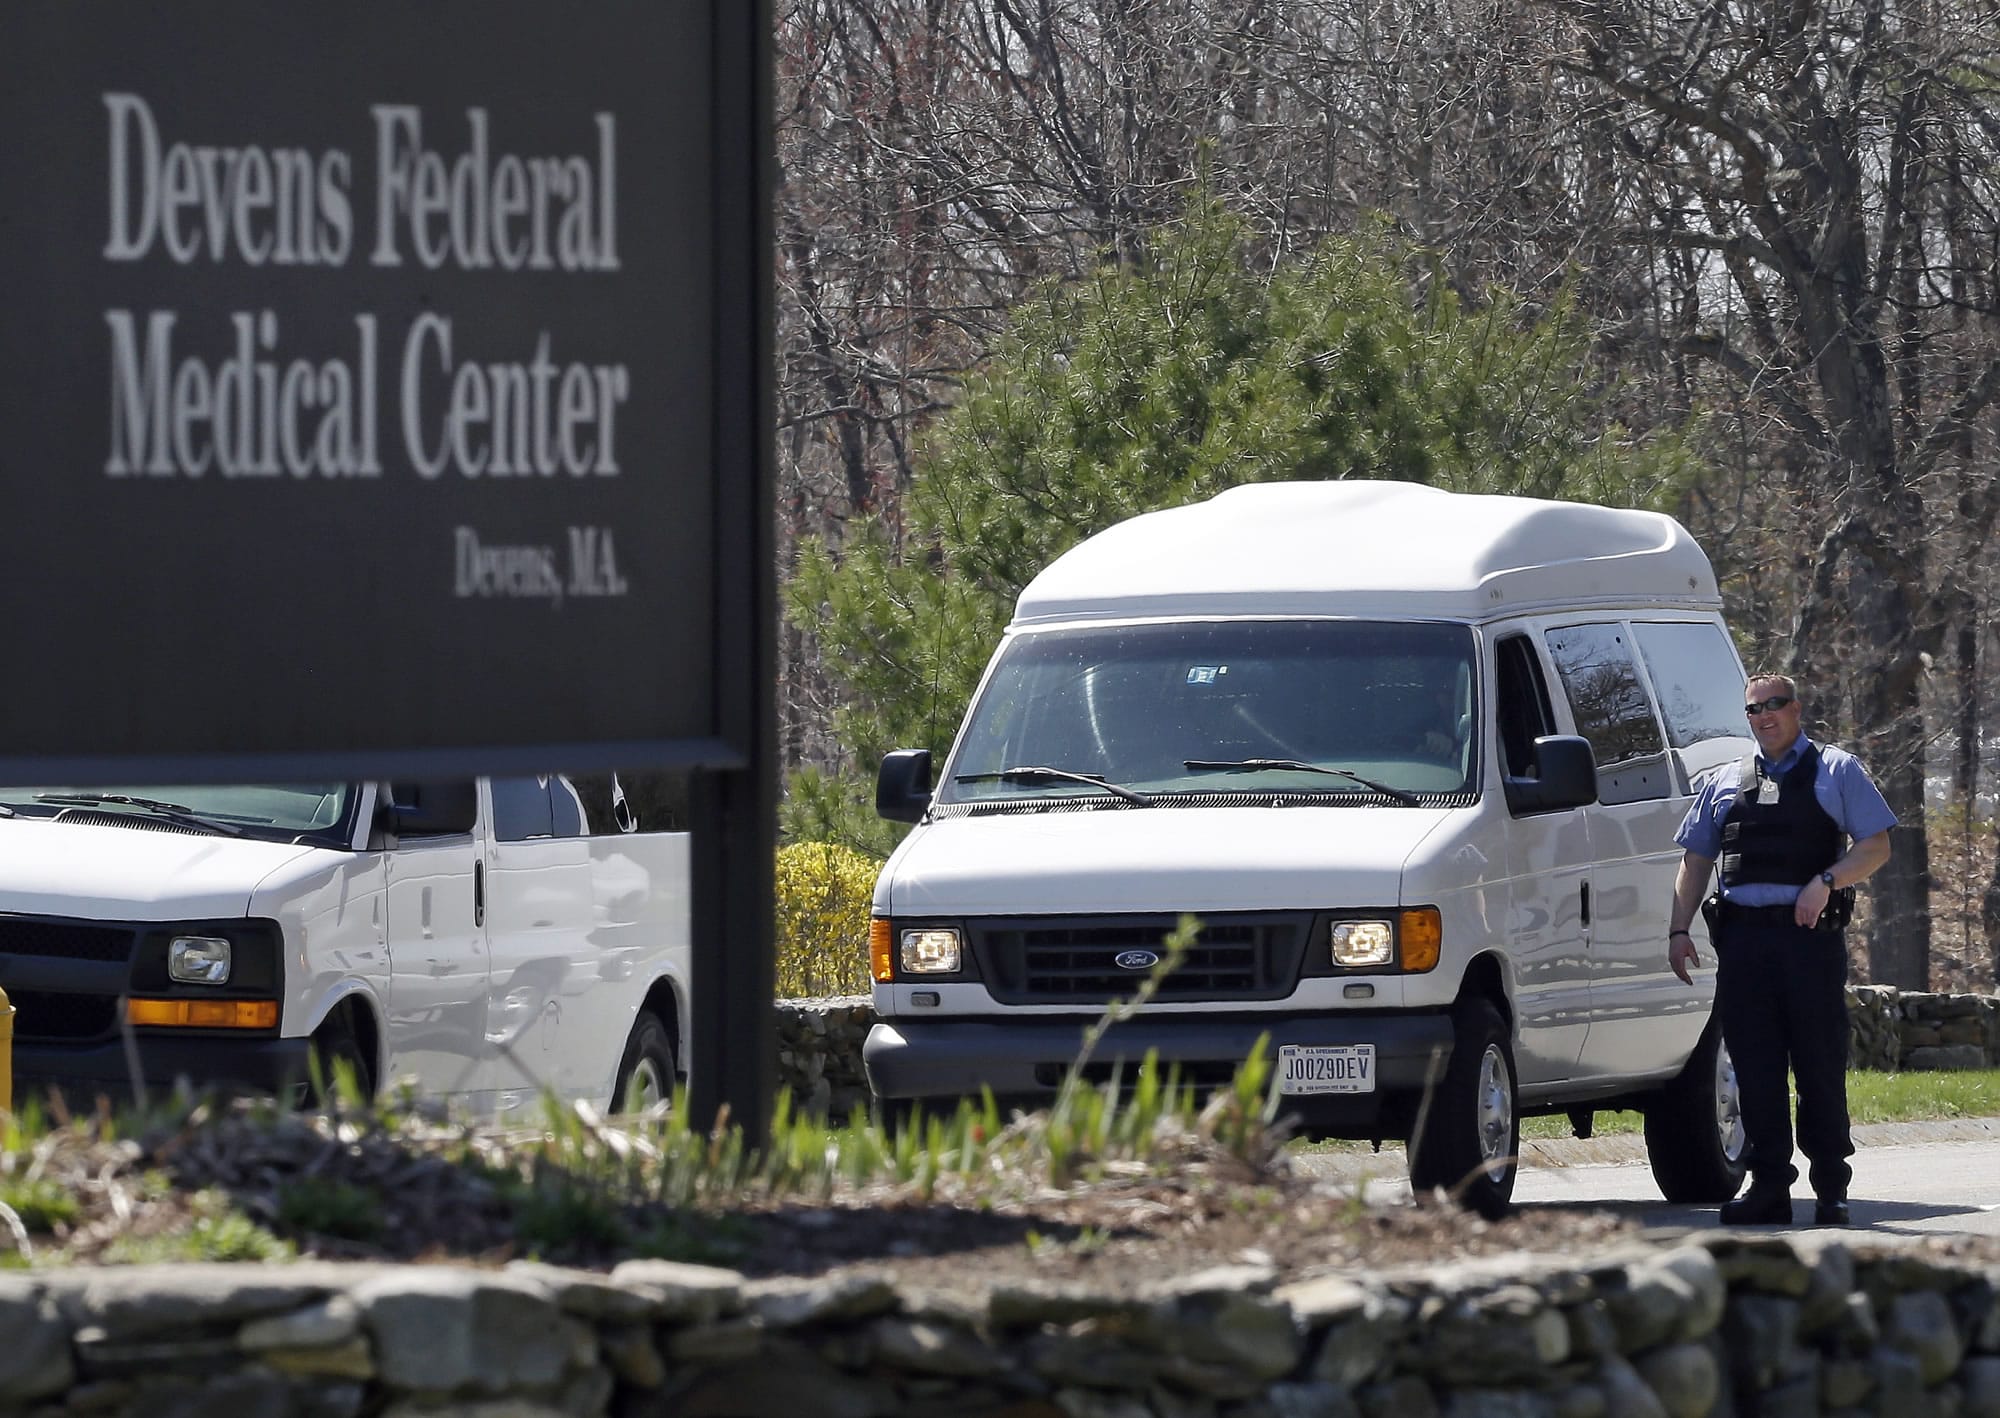 A guard stands near the entrance to the Devens Federal Medical Center in Devens, Mass., on Friday. The U.S.